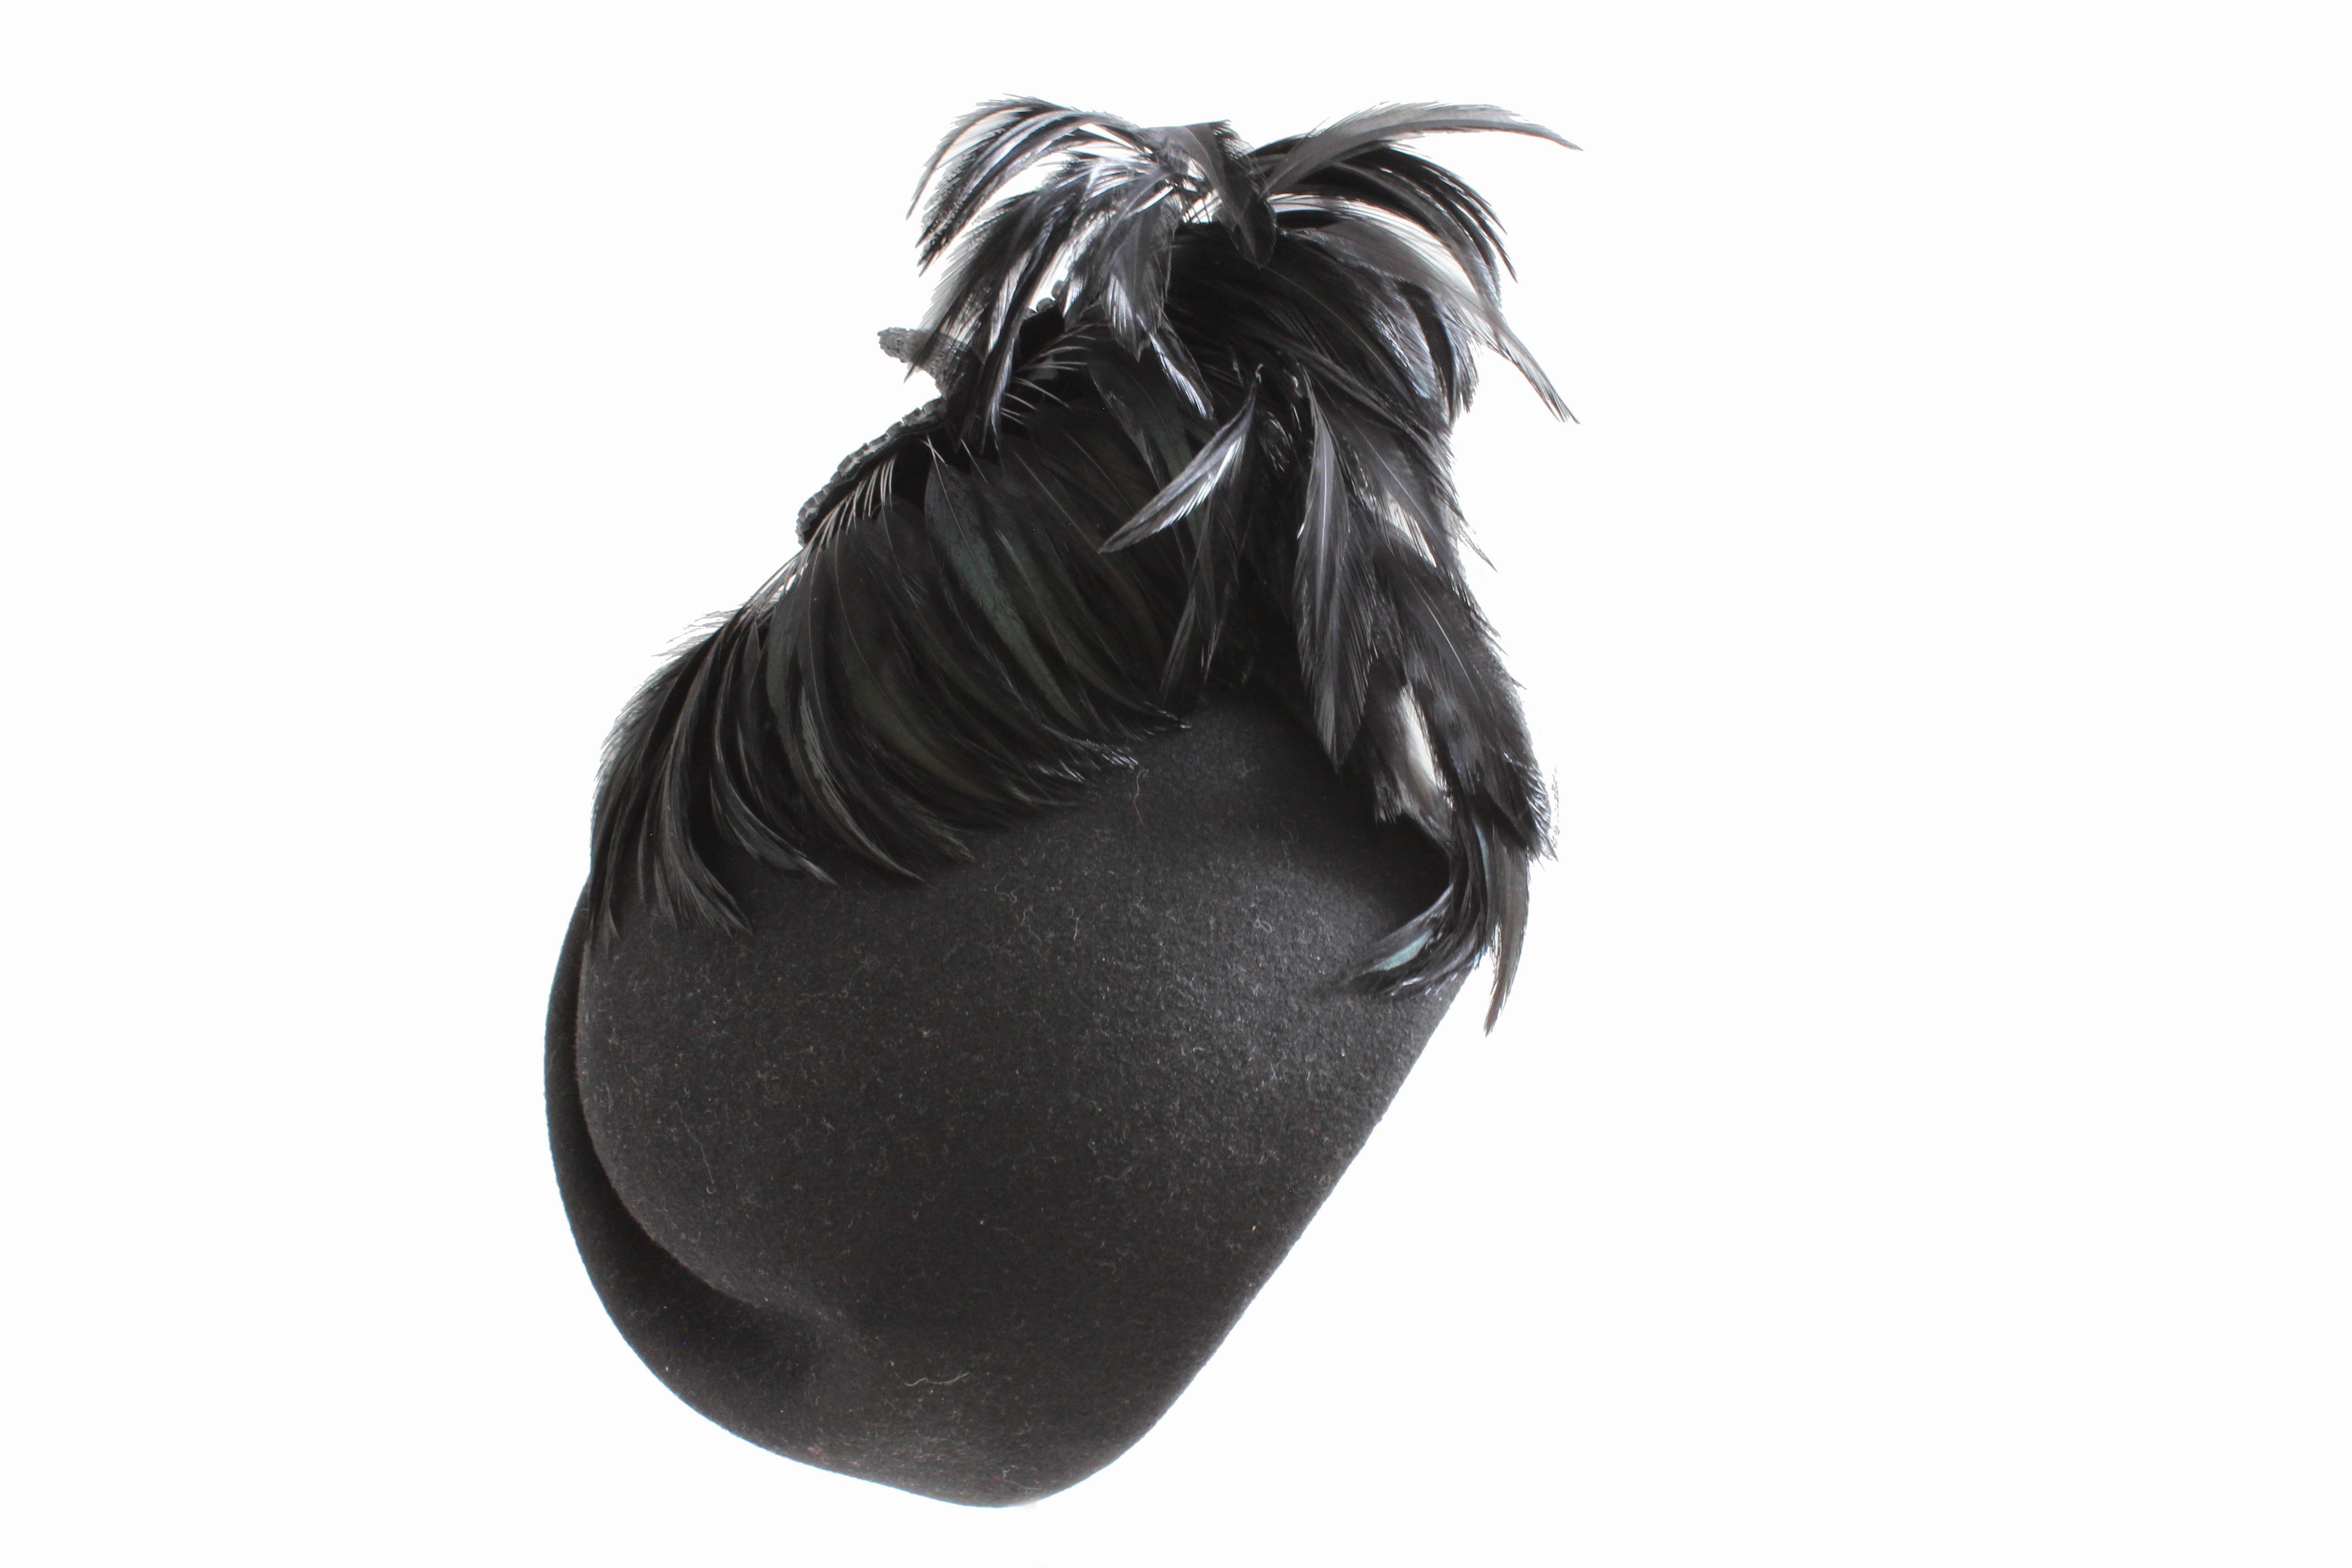 Women's Jack McConnell Boutique Black Wool Clochette Hat with Feathers 1960s Bollman Hat